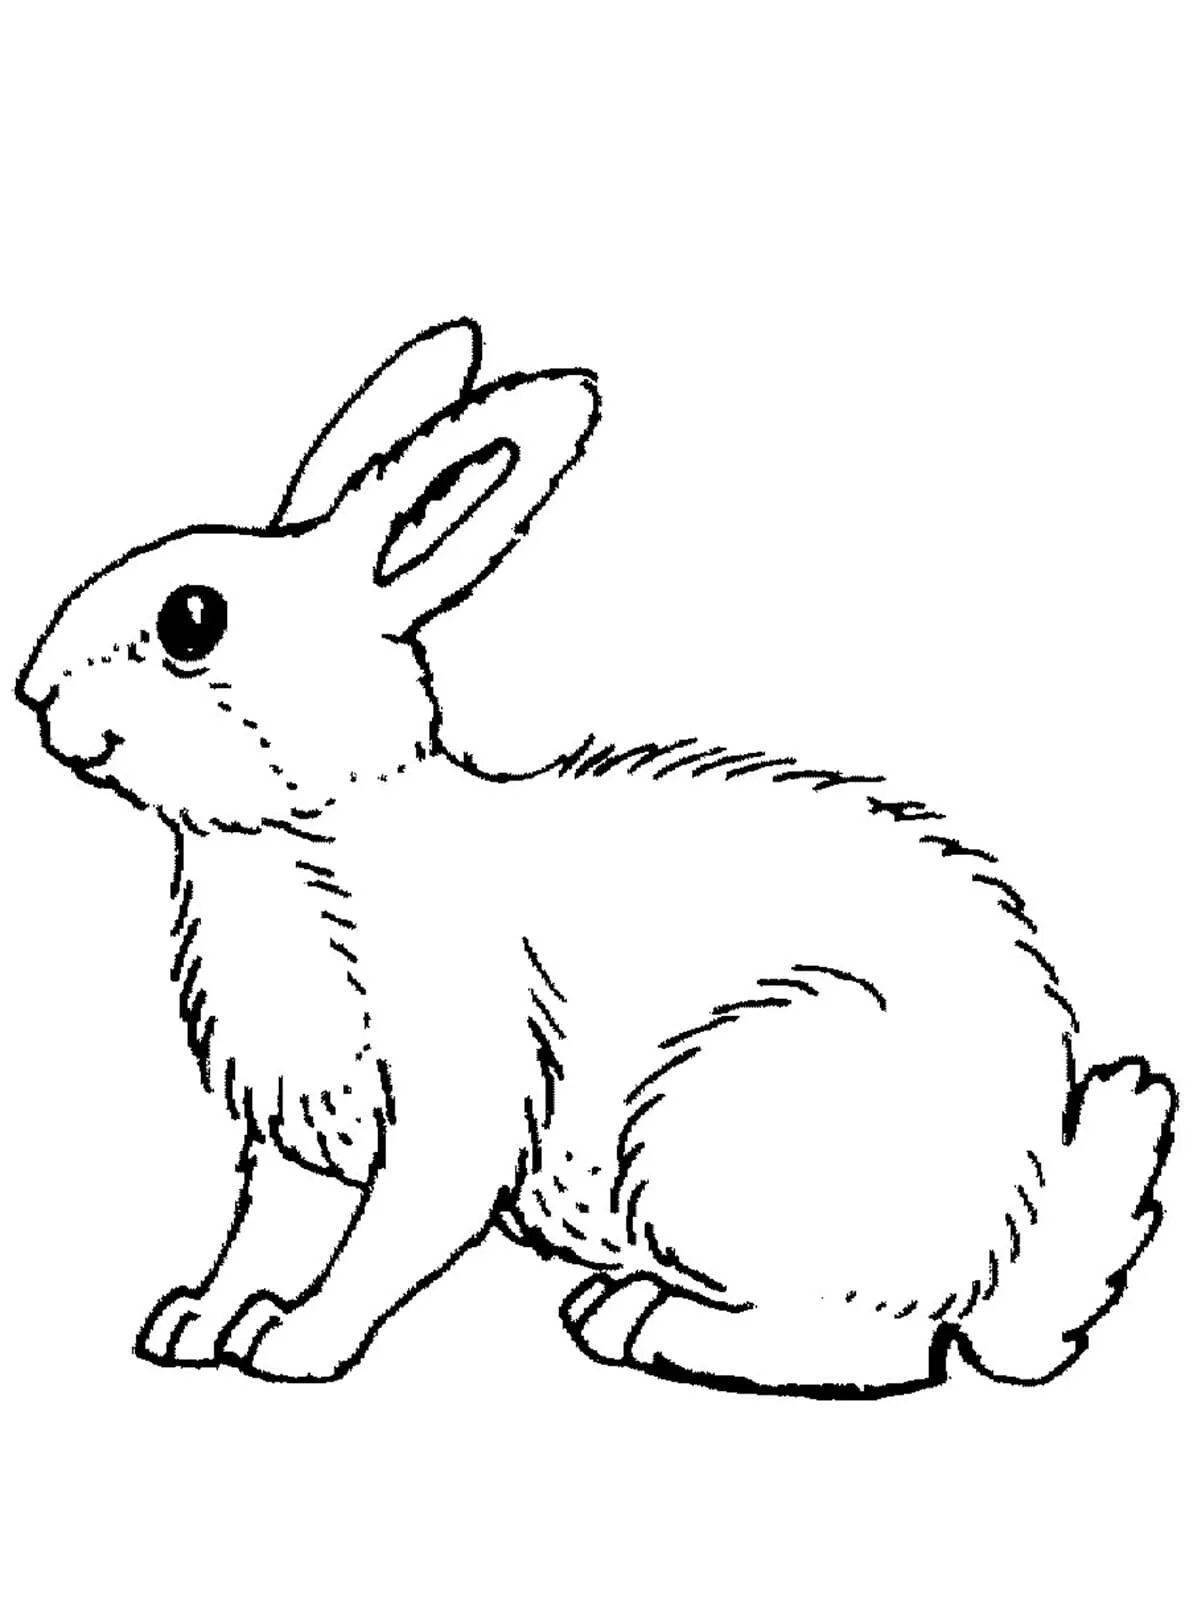 Fun coloring of a hare for children